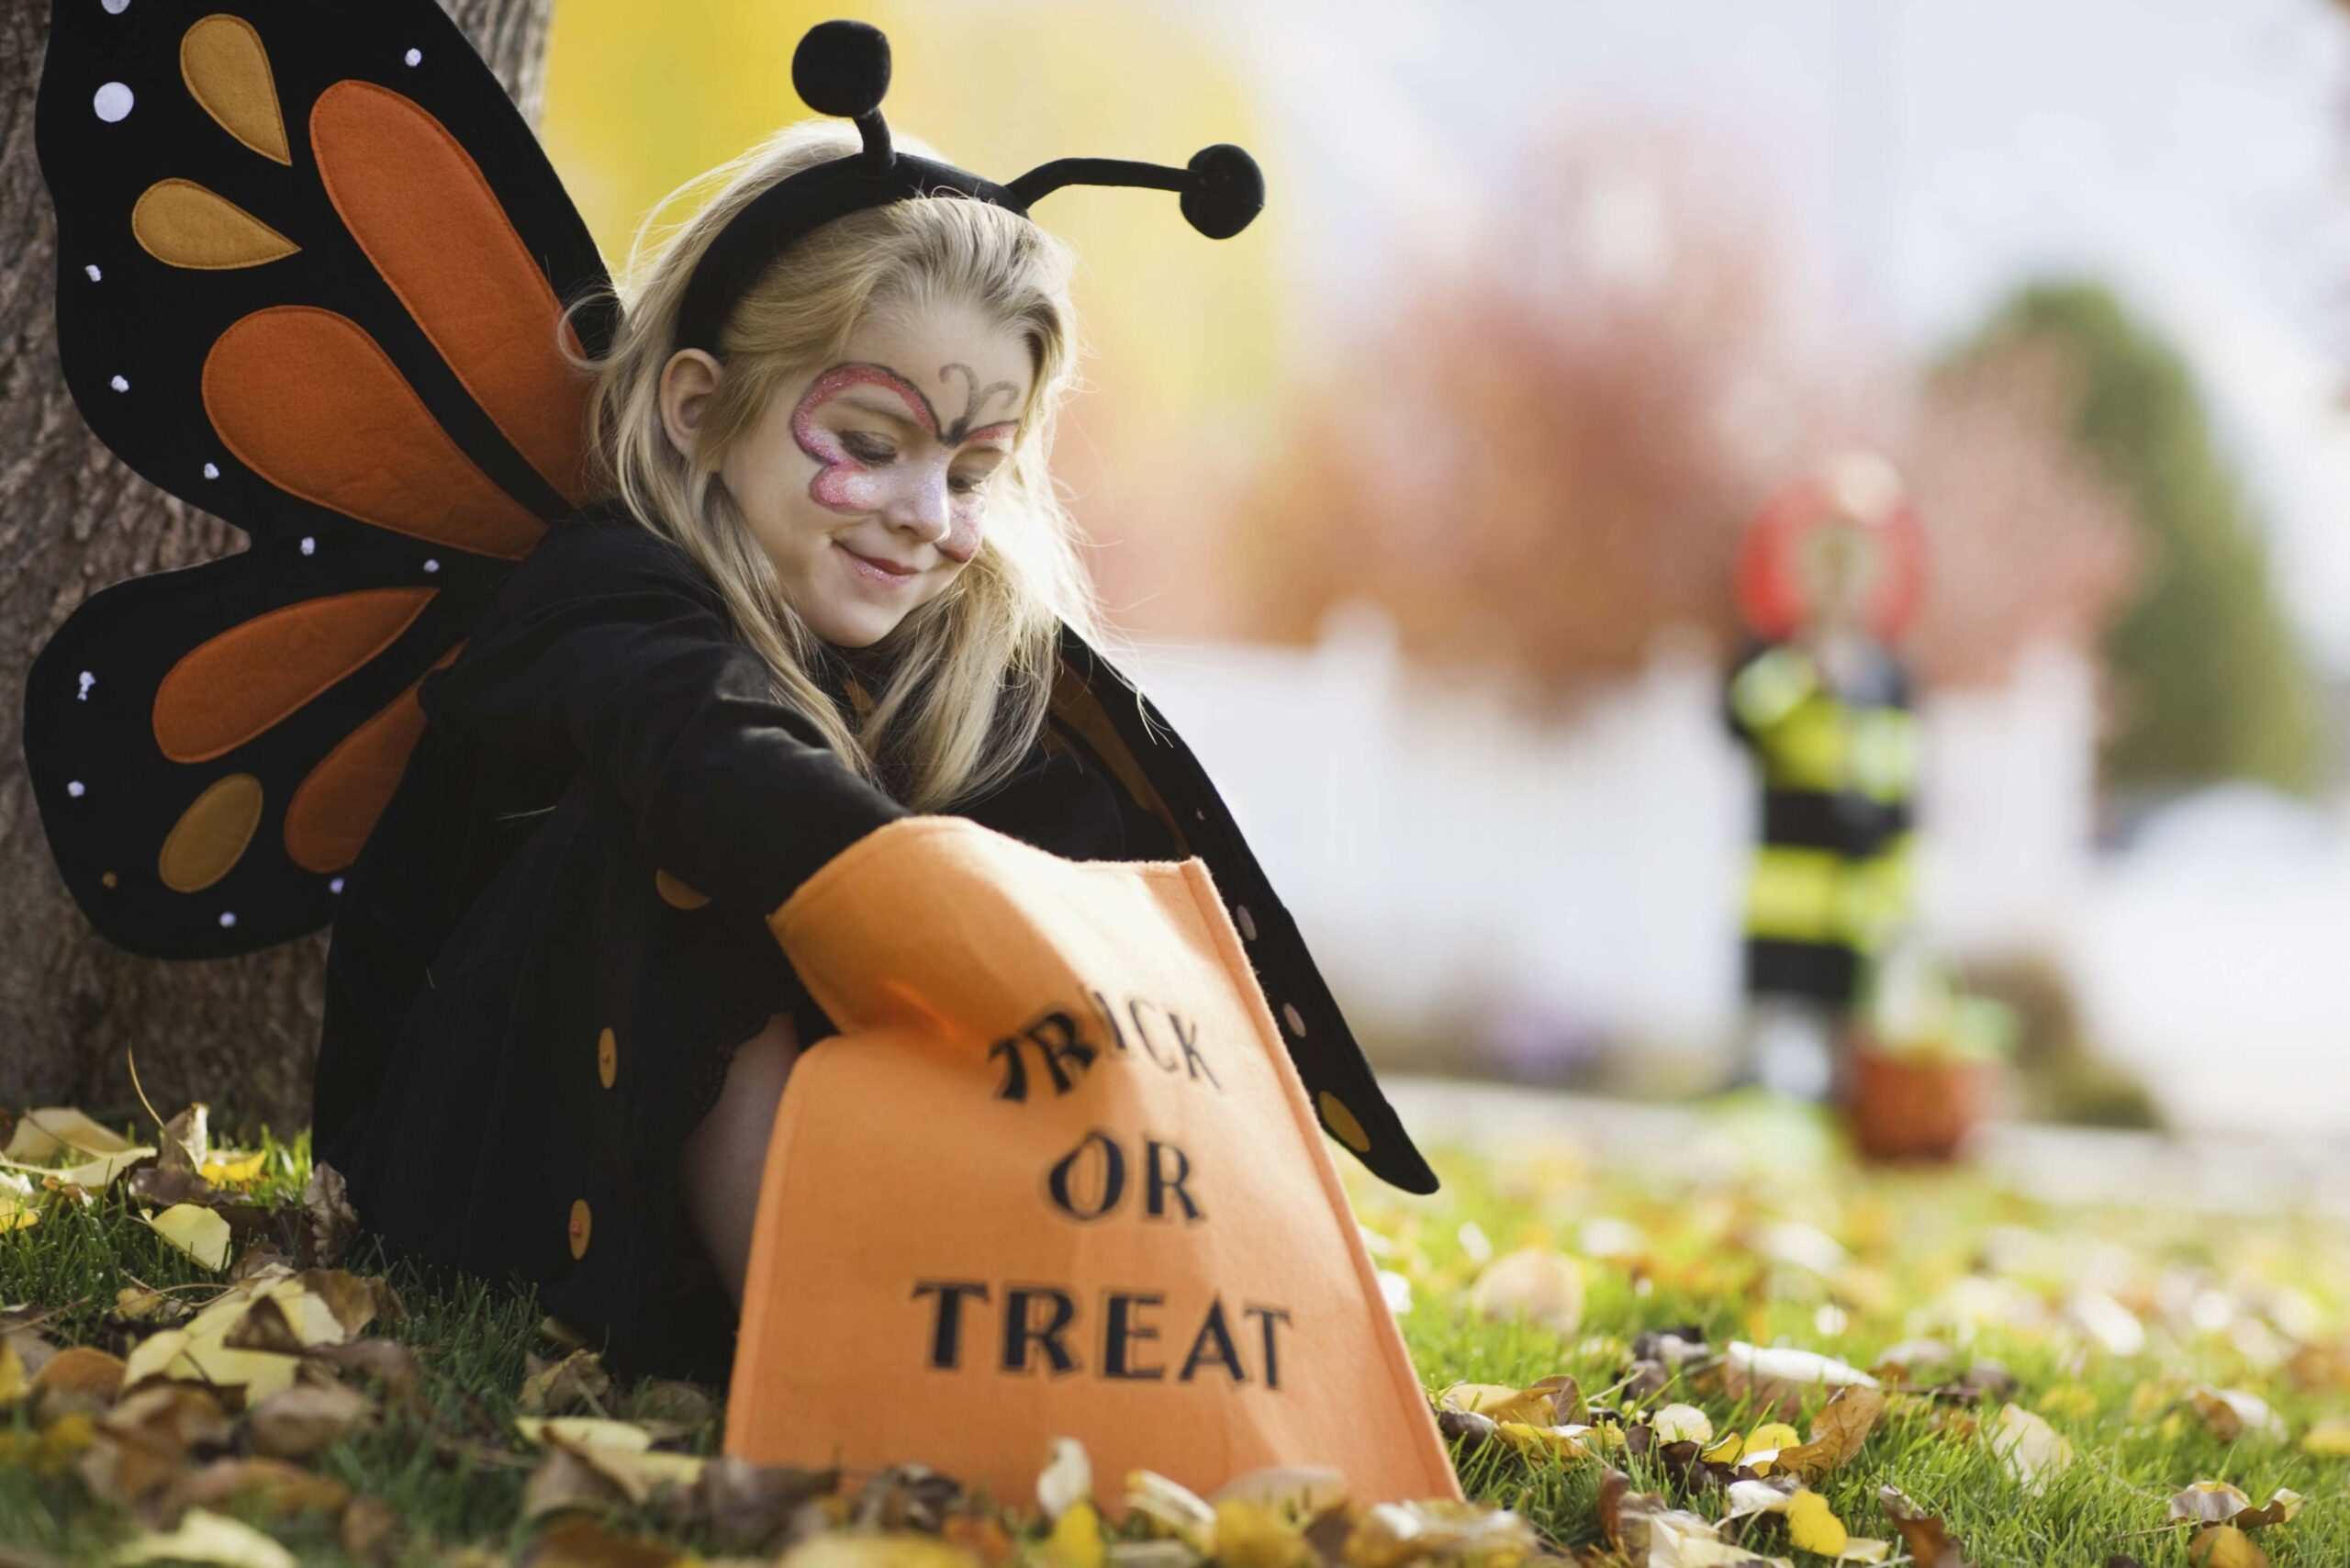 Sugar: A trick or treat? by UofL Health Louisville KY